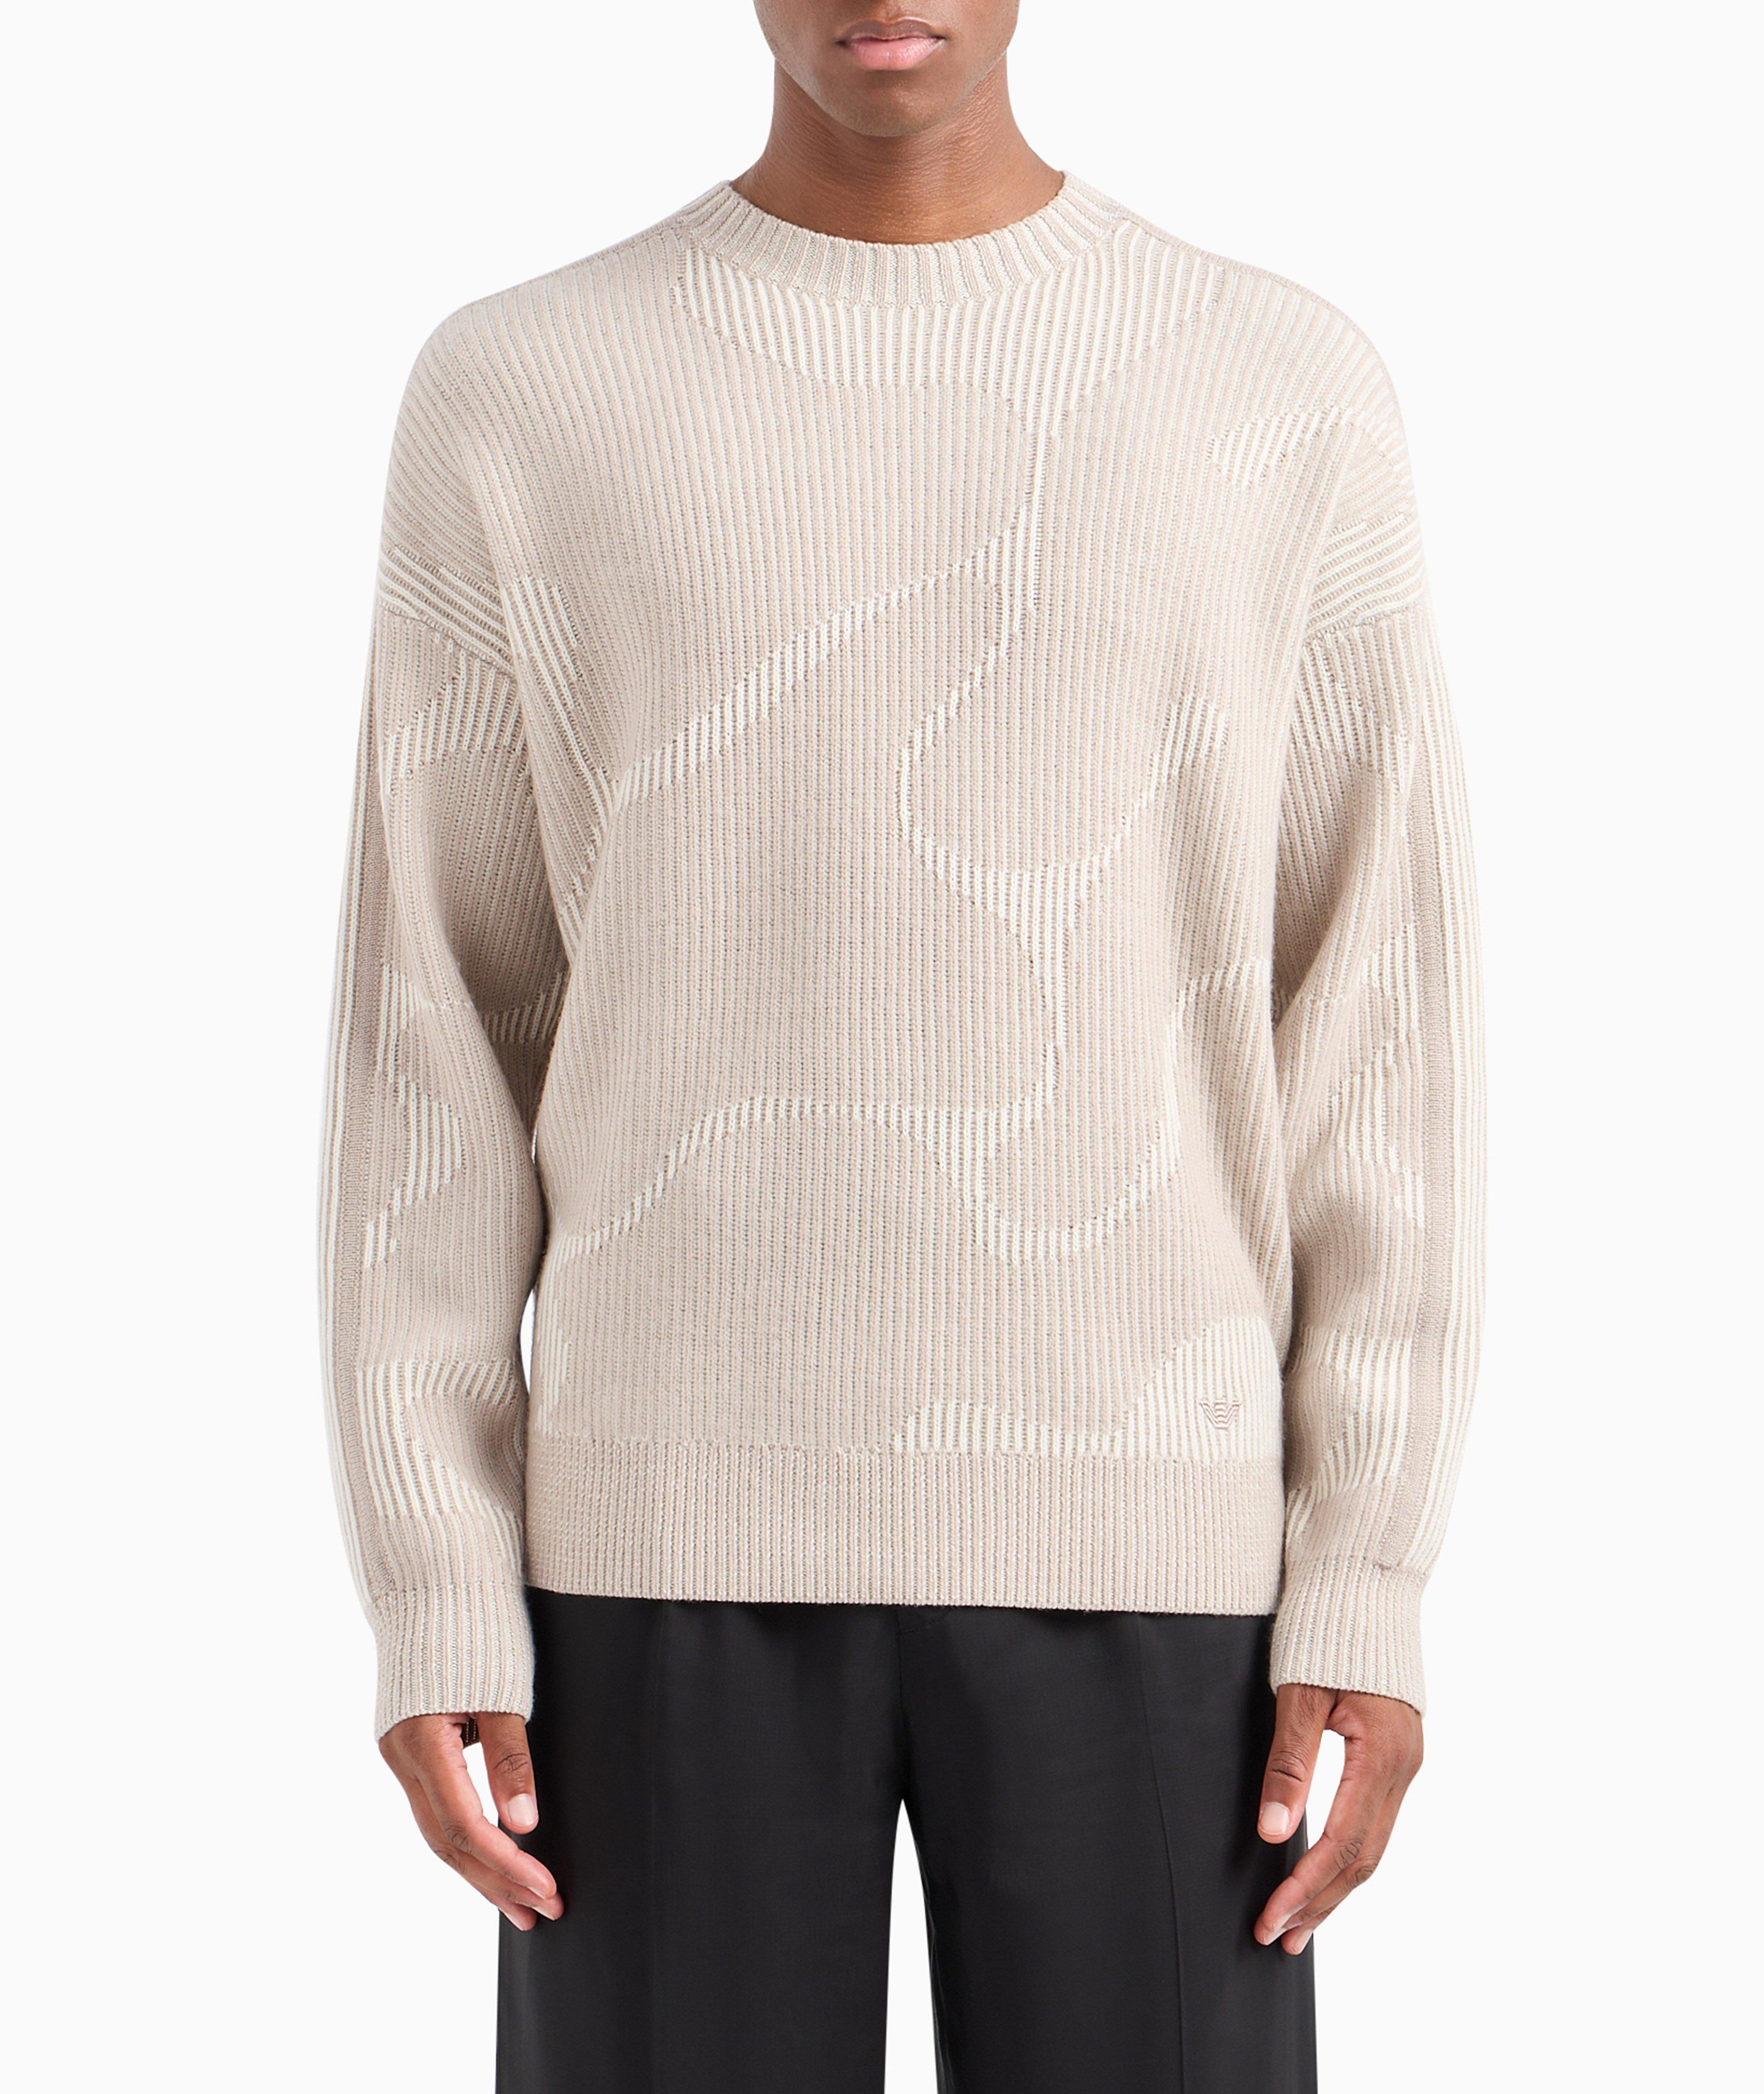 Abstract Jaquared Pattern Ribbed Knit Sweater  image 1